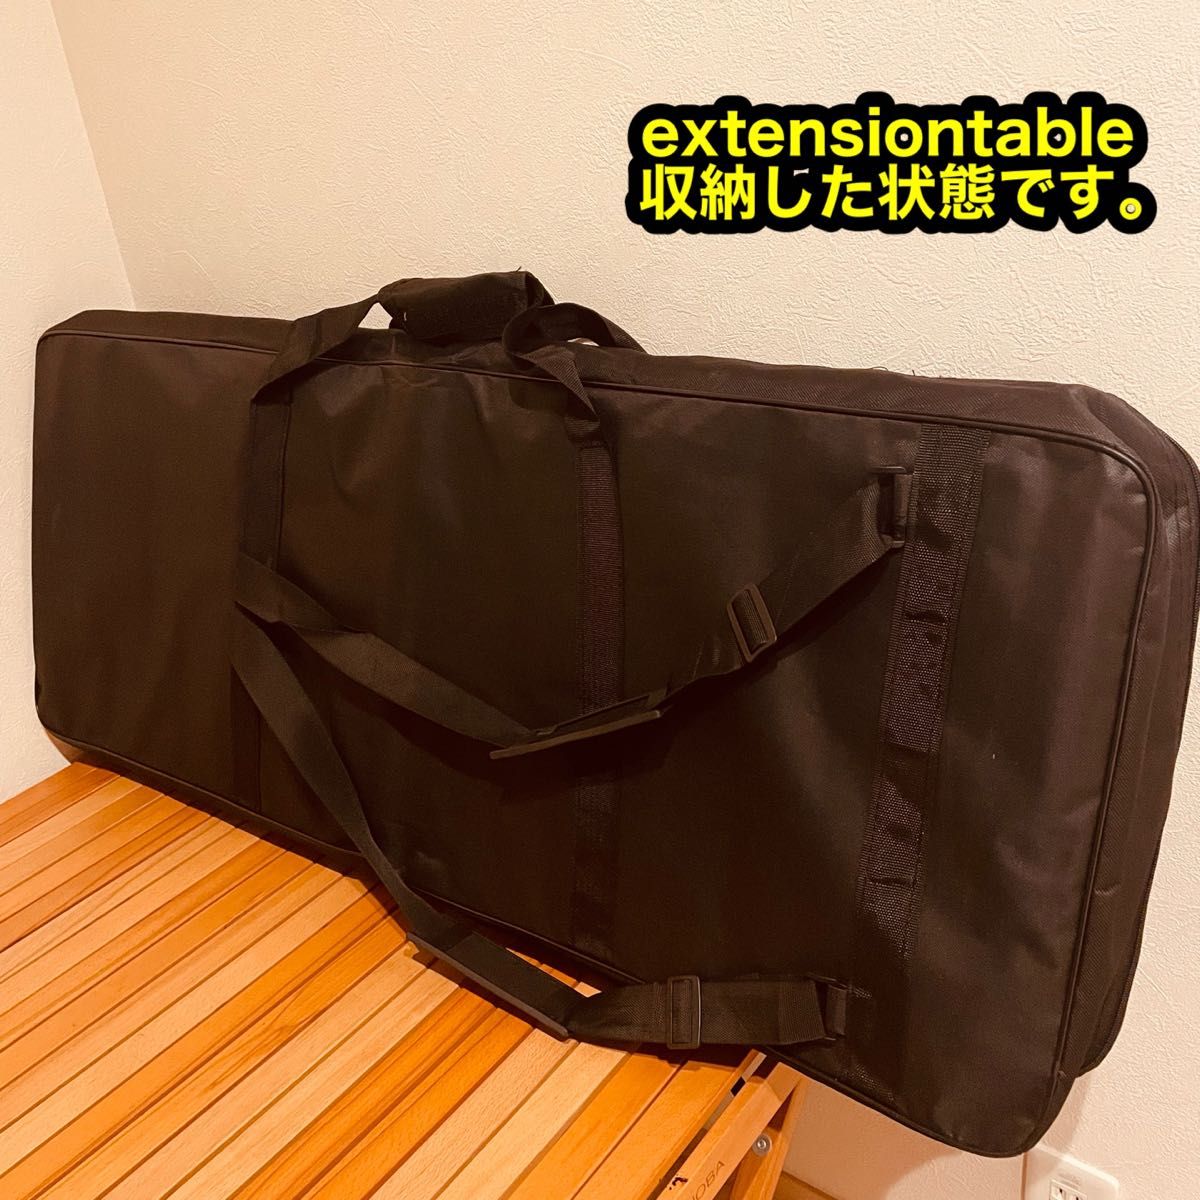 www_extensiontable & フラットバーナー 収納ケース IGT